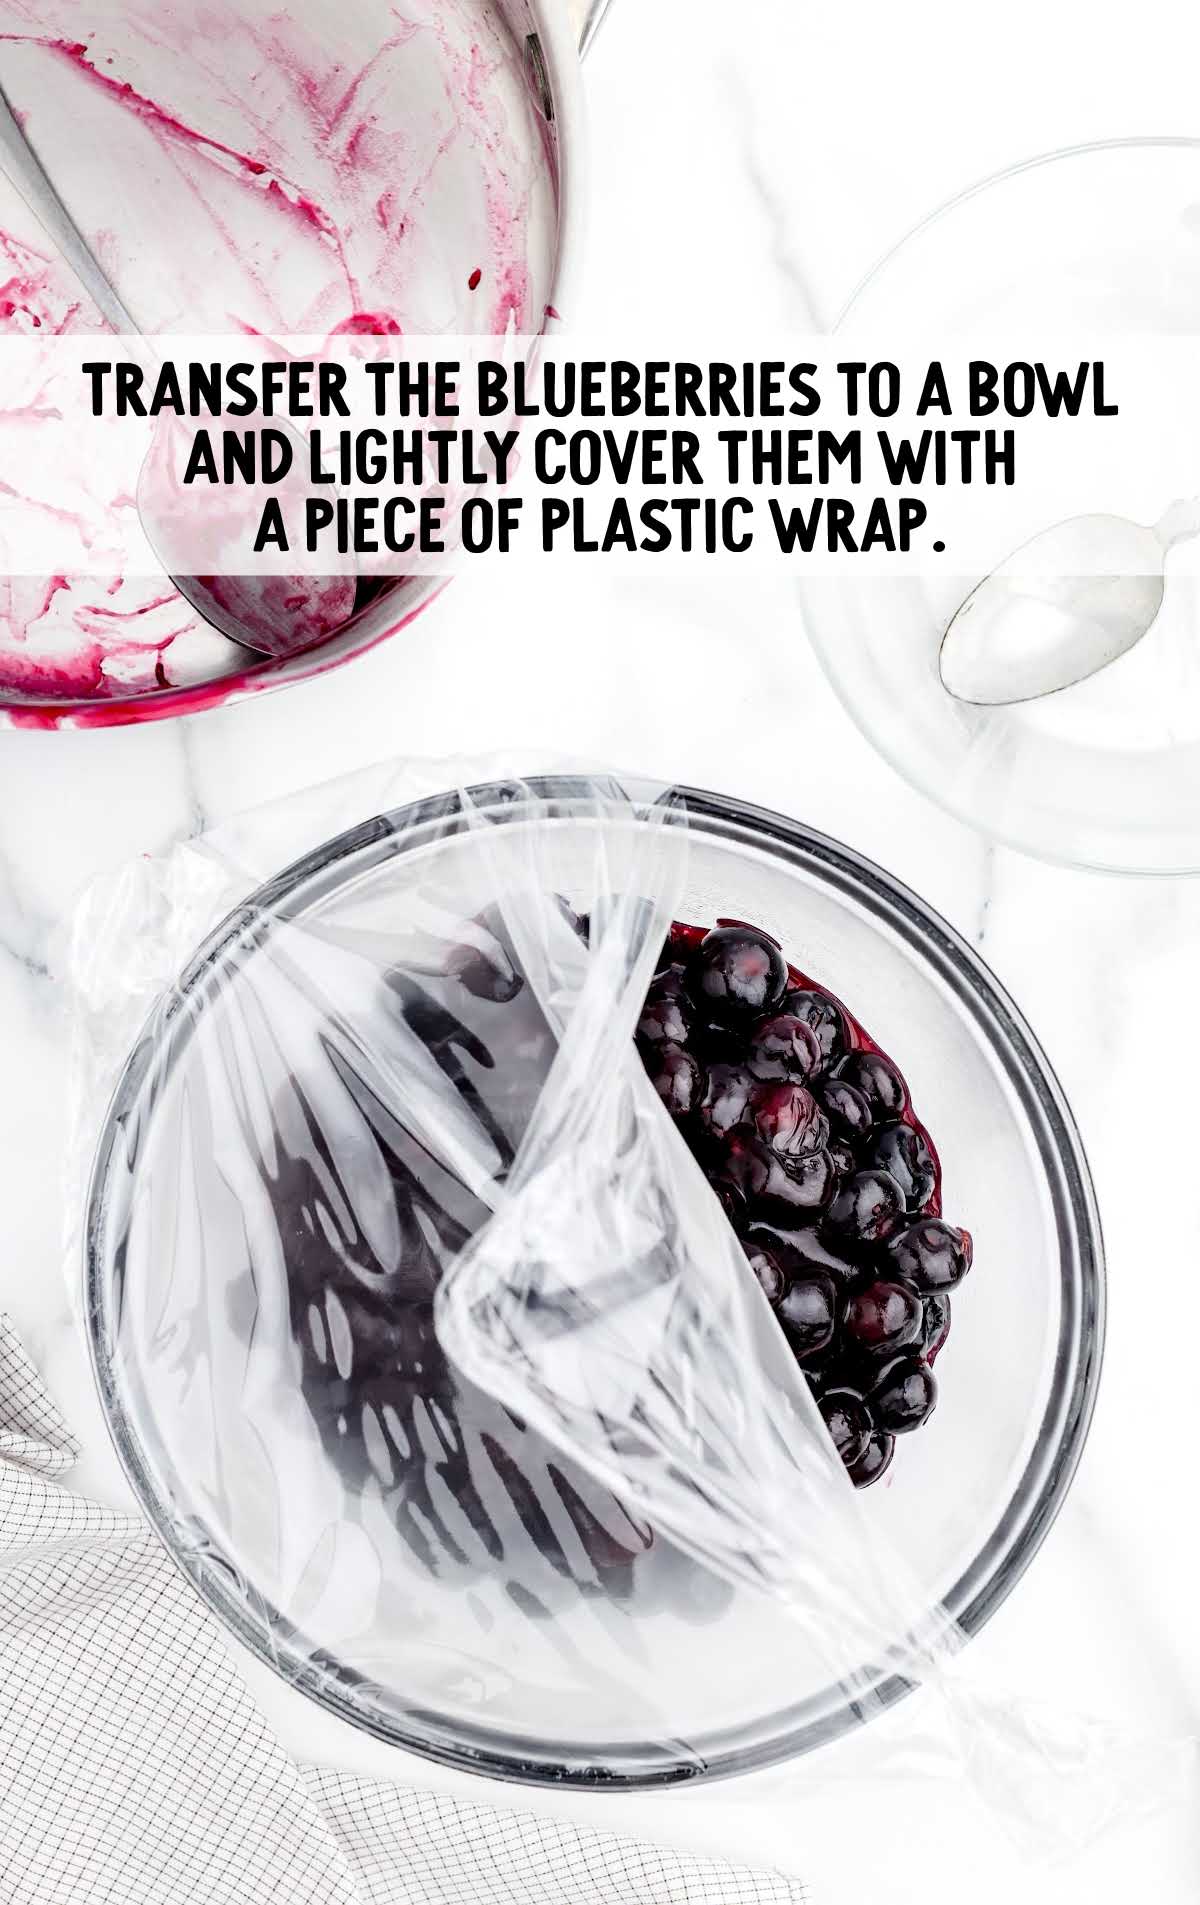 blueberries transferred to a bowl and covered in a plastic wrap